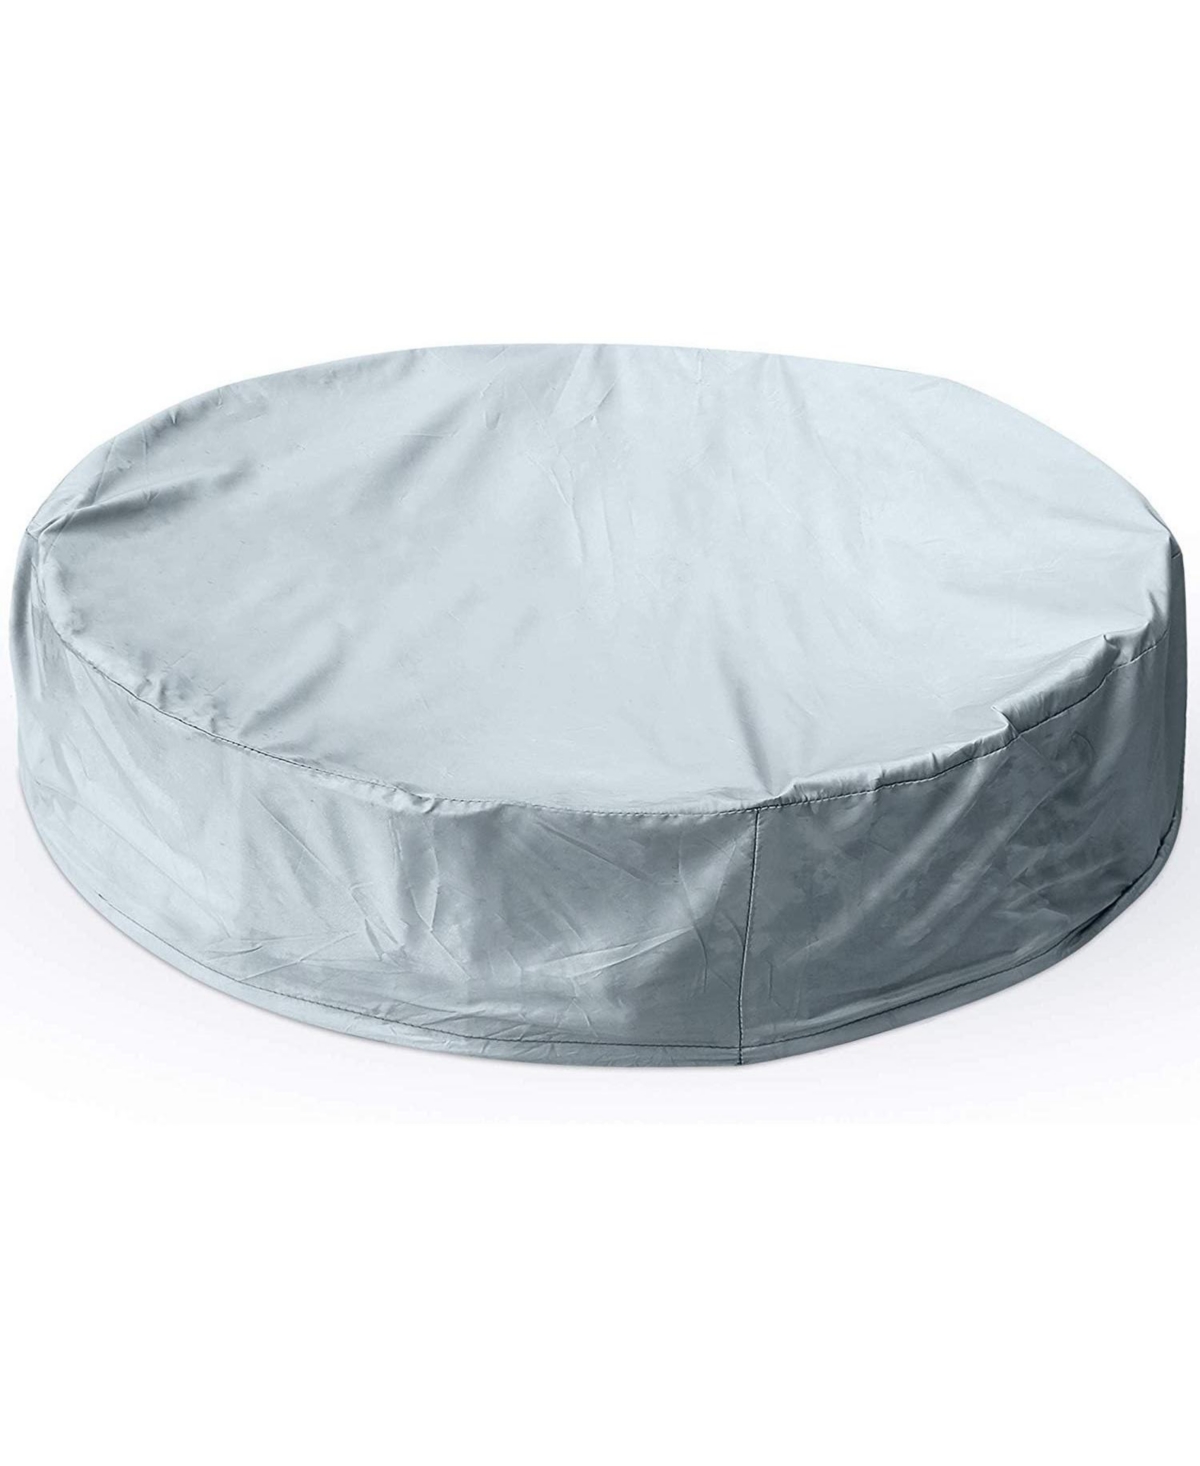 Universal Grey Pet Pool Round Cover Large - Grey